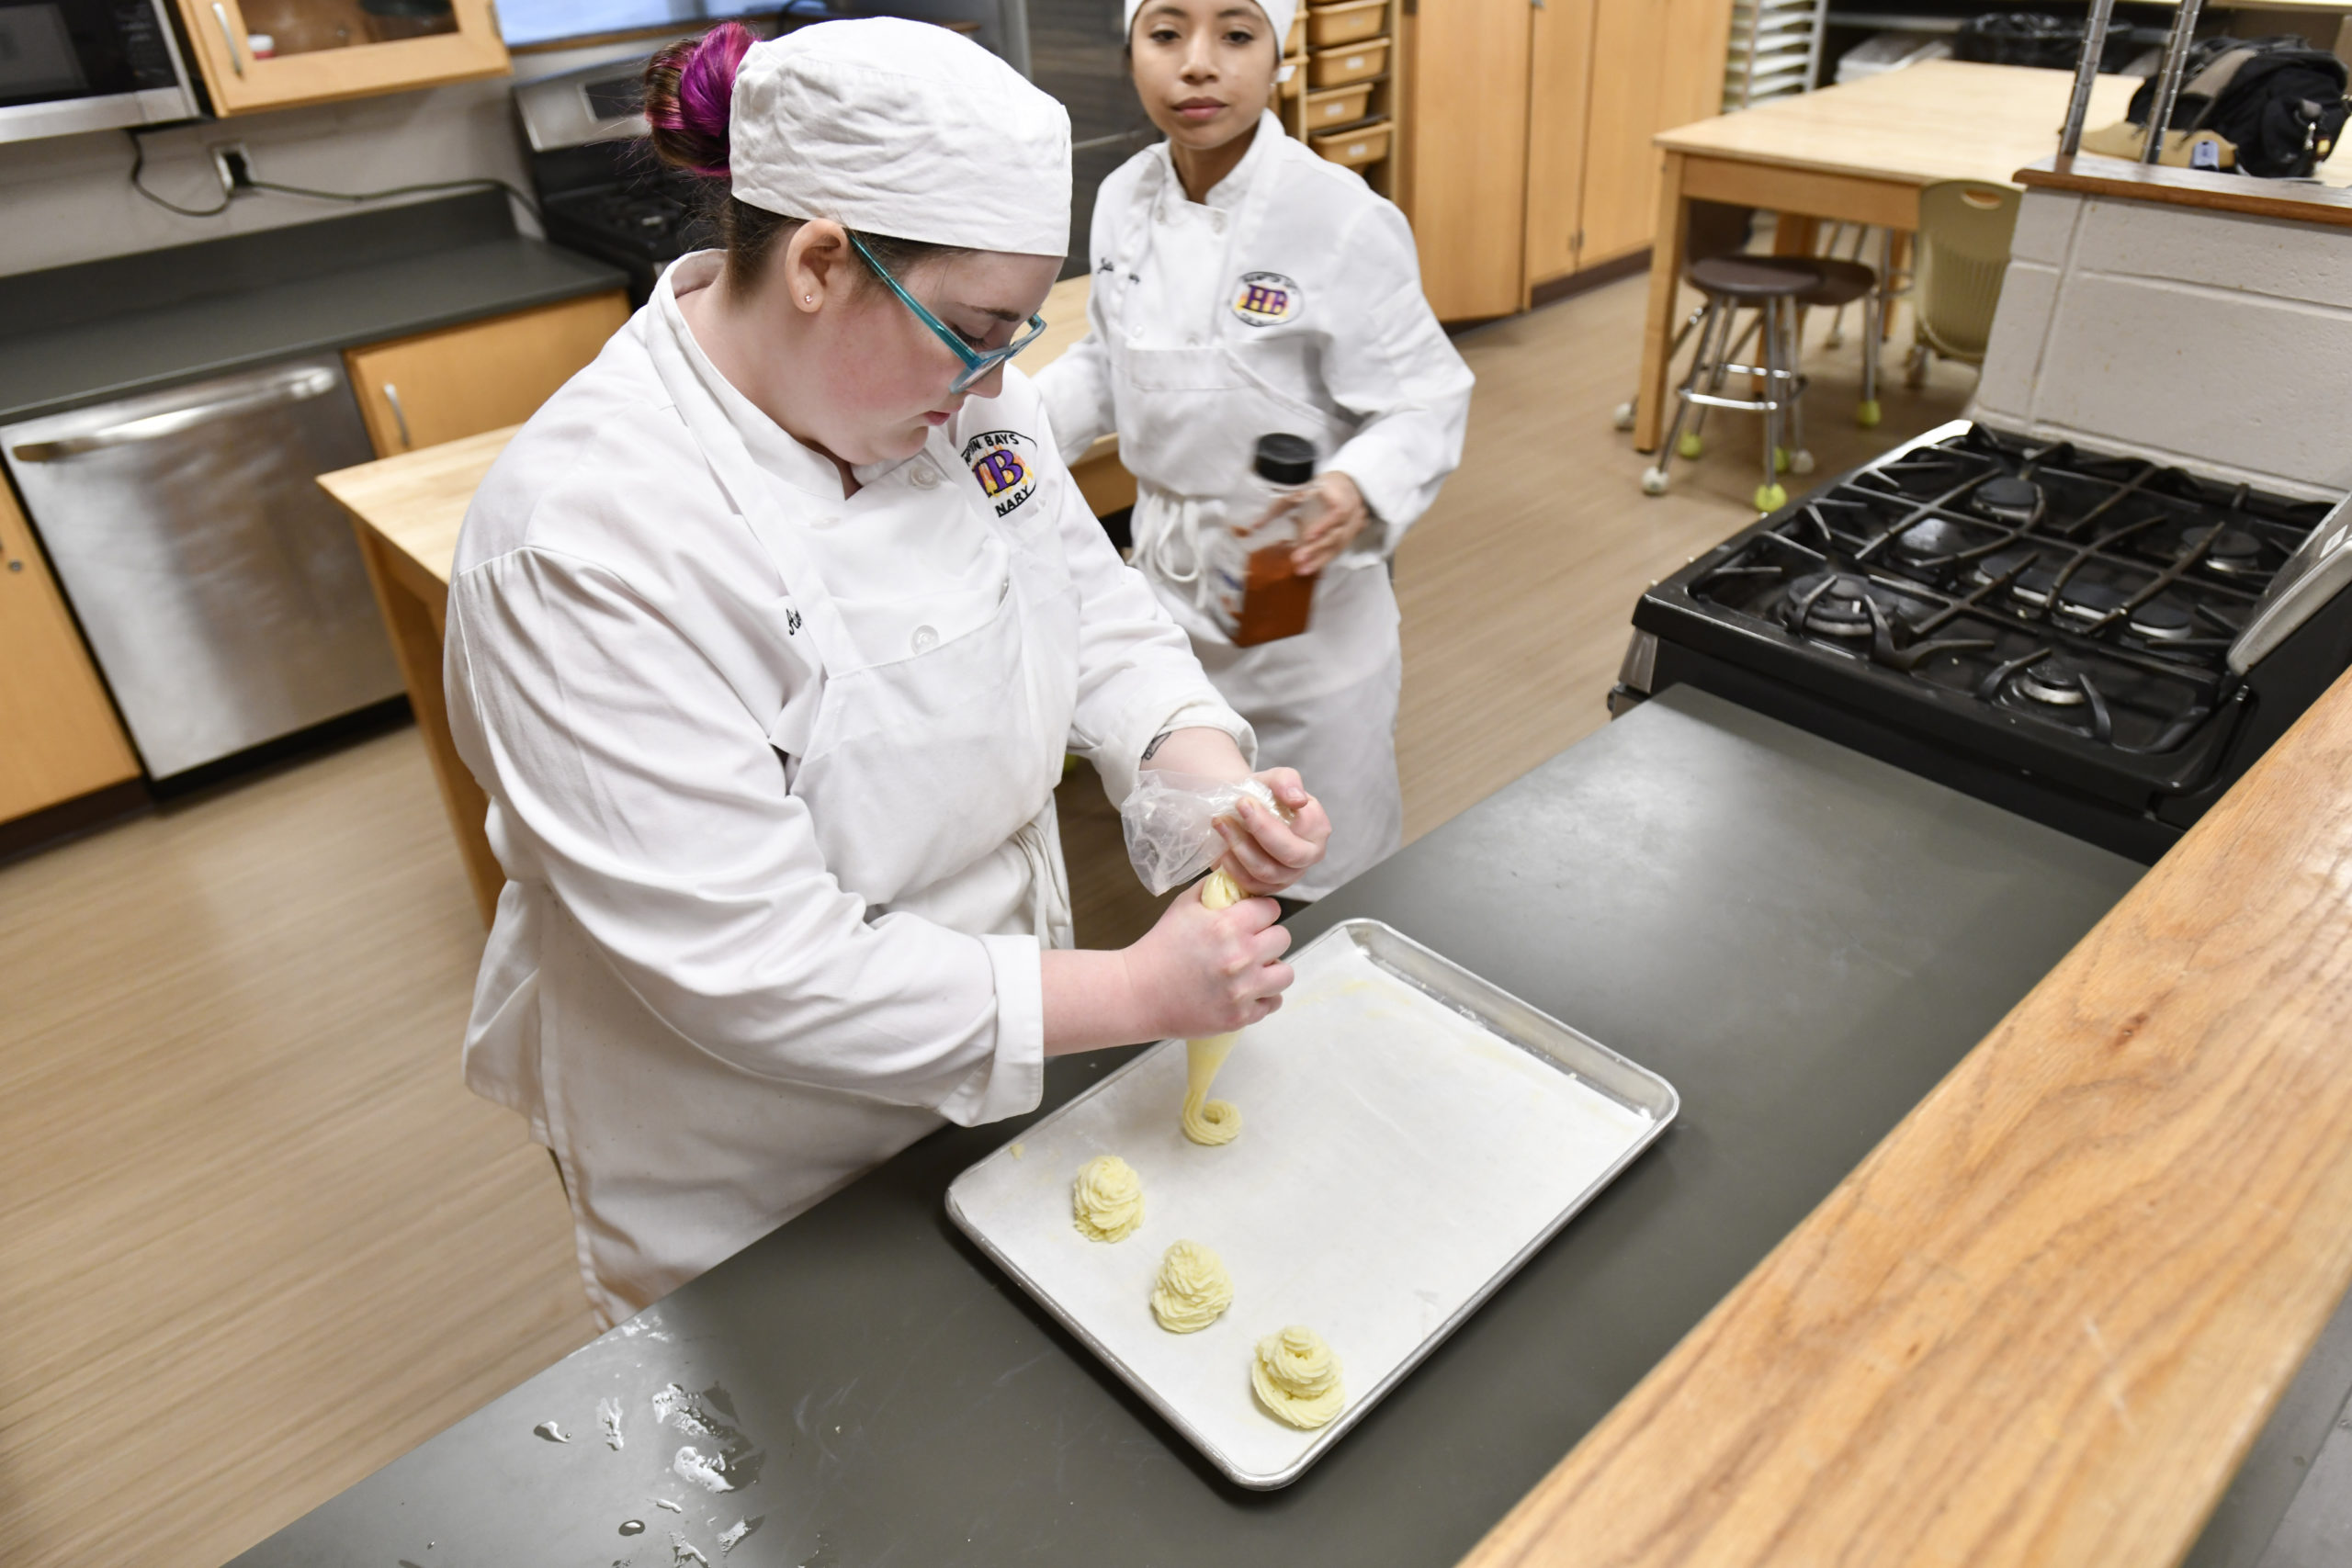 Students Aimee Pelletier and Juliana Alvarez work on and assignment during the culinary class at Hampton Bays High School. DANA SHAW